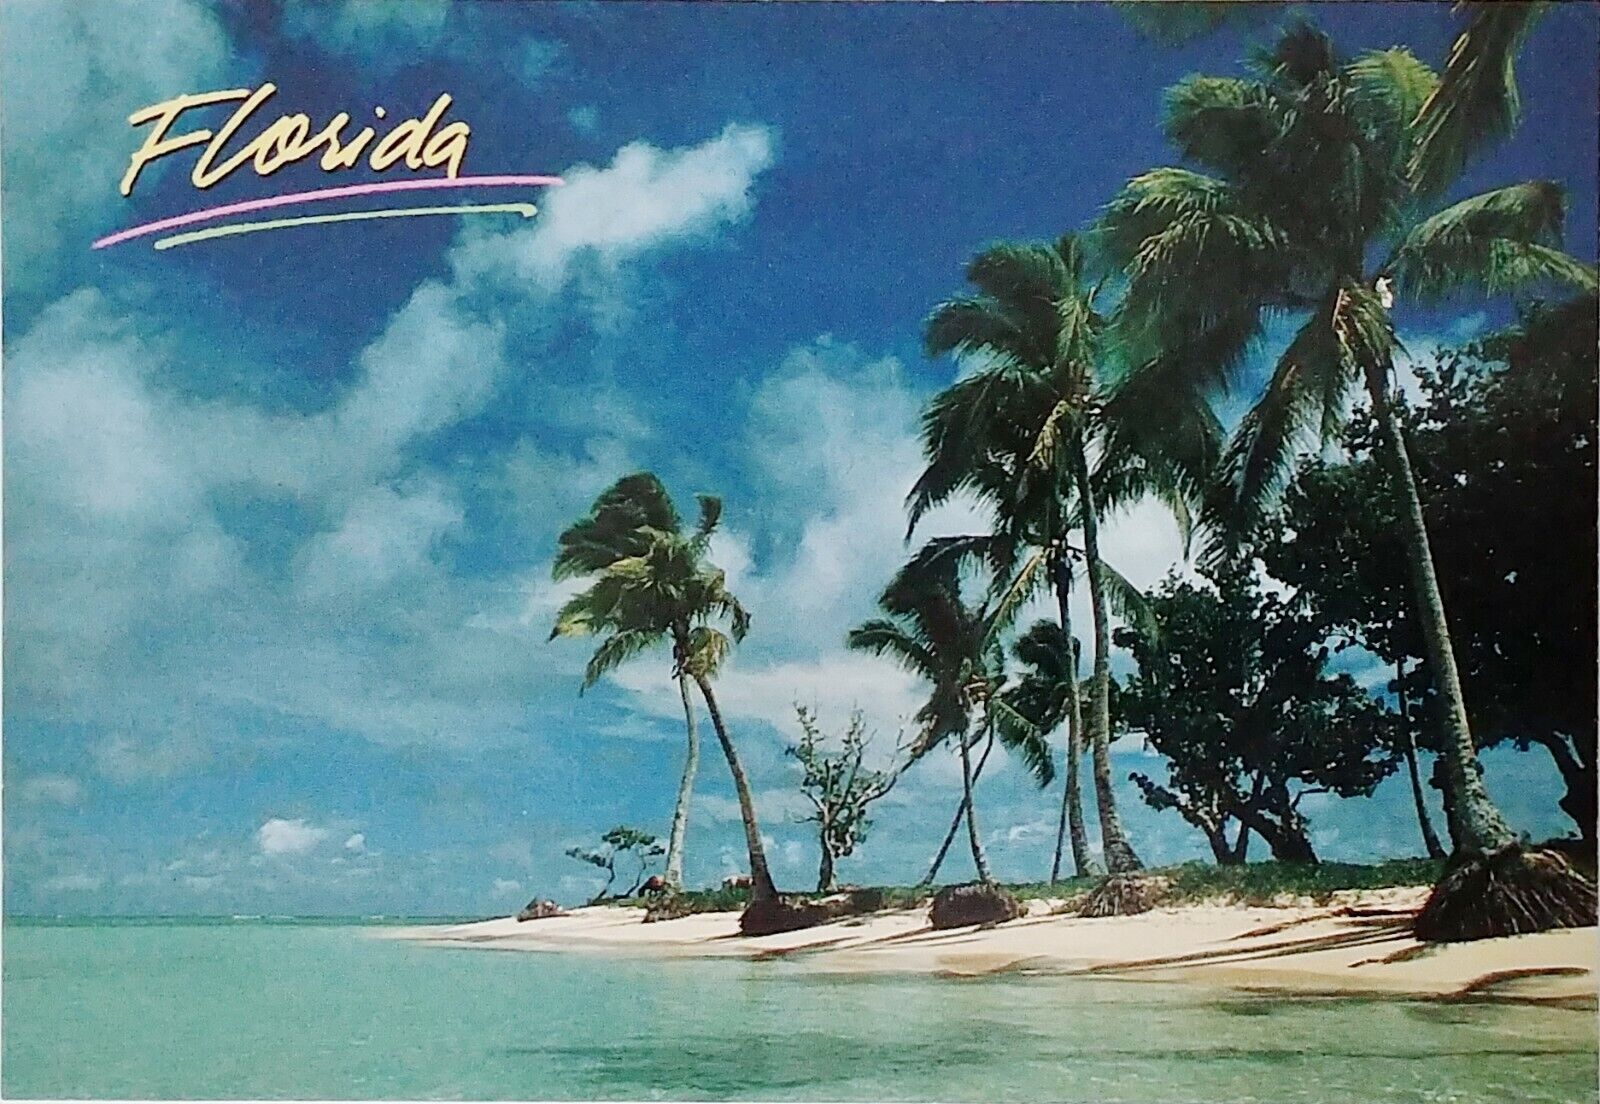 Solitude Isolated Beach Horses in Background Vintage Florida Postcard